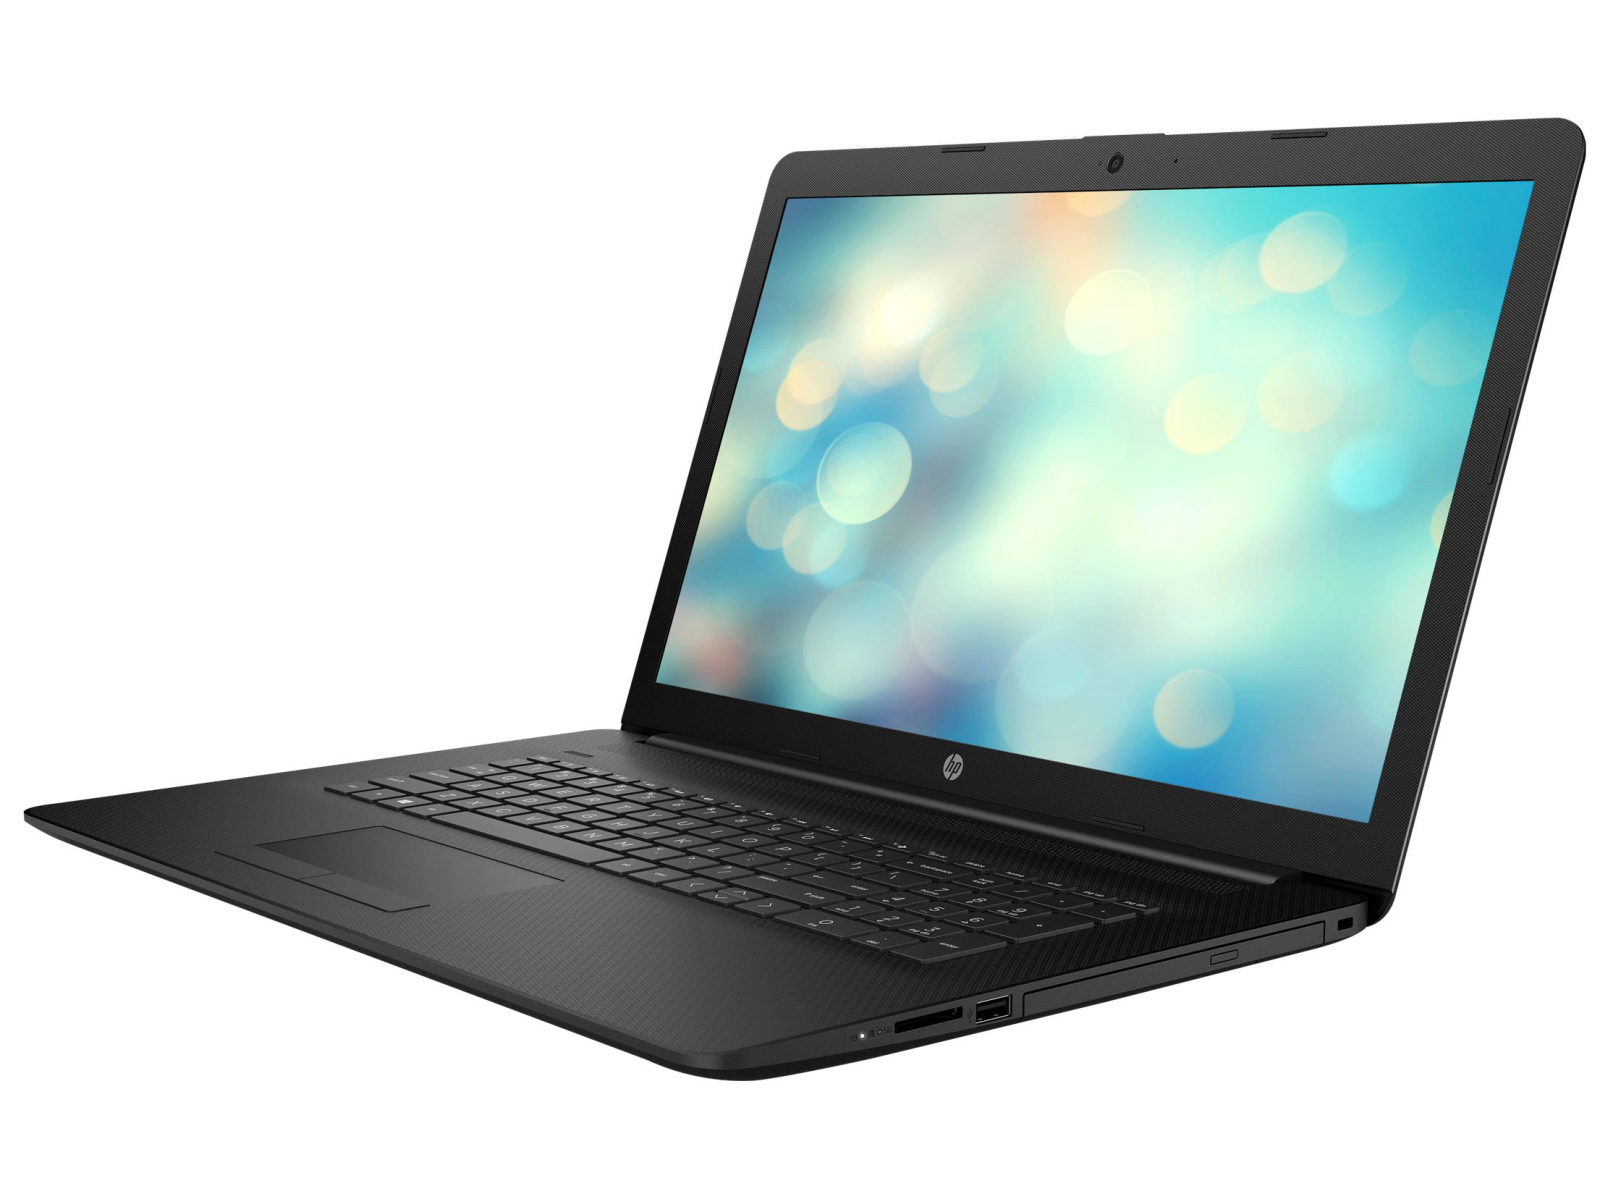 HP 17 Laptop Review: A simple office notebook with a DVD burner